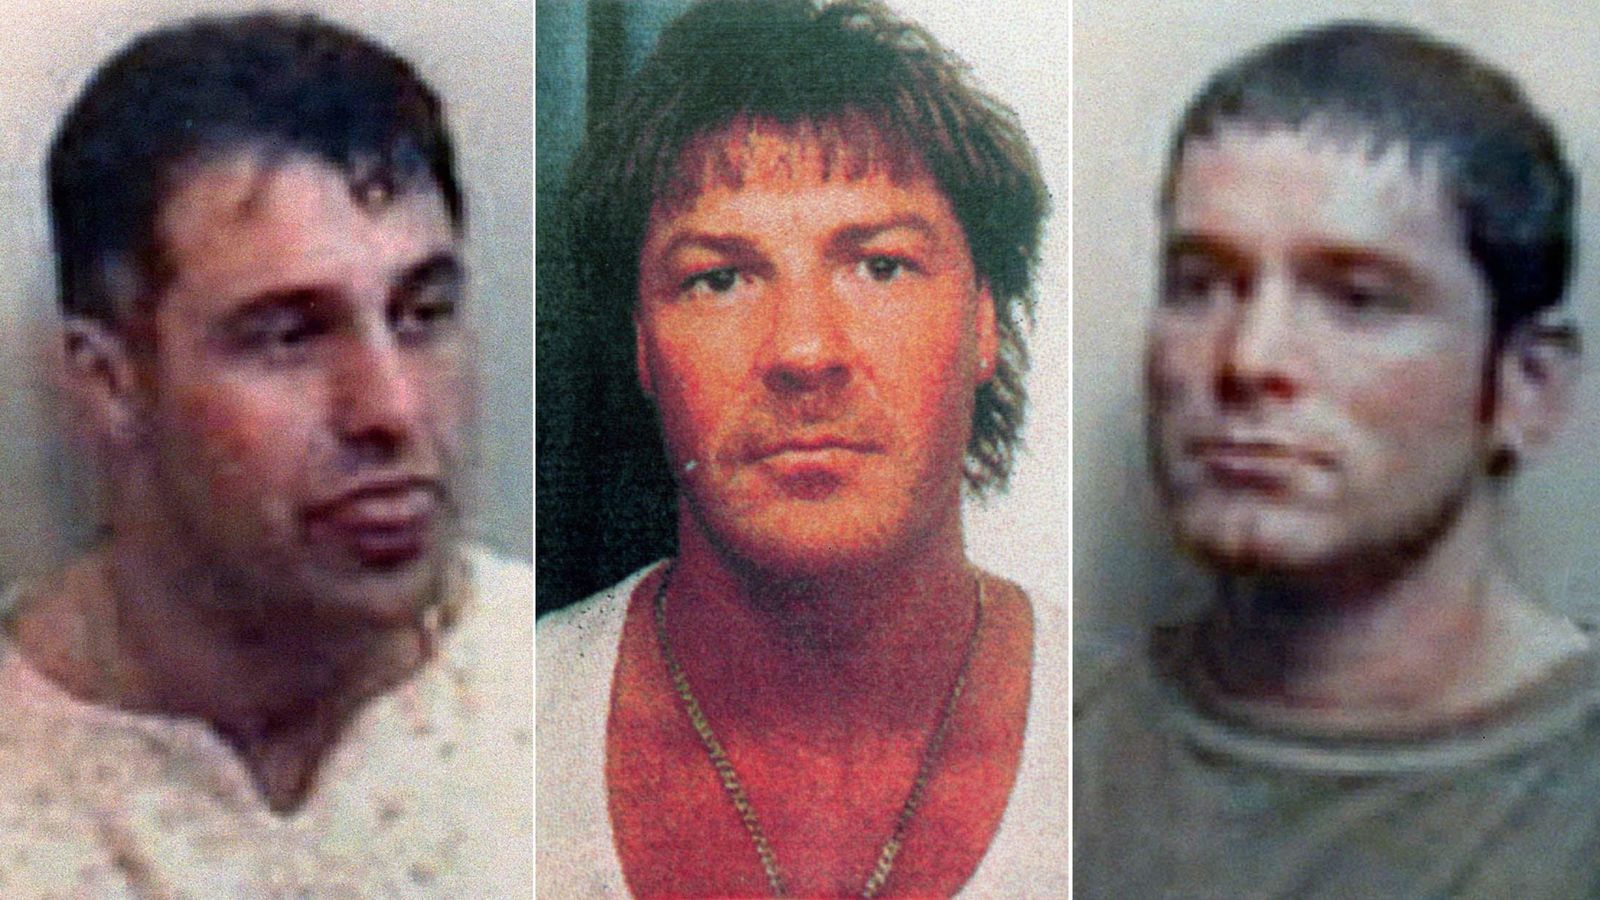 The Essex Murders: Private investigators say new evidence 'points to different killer' in 1995 Range Rover shooting